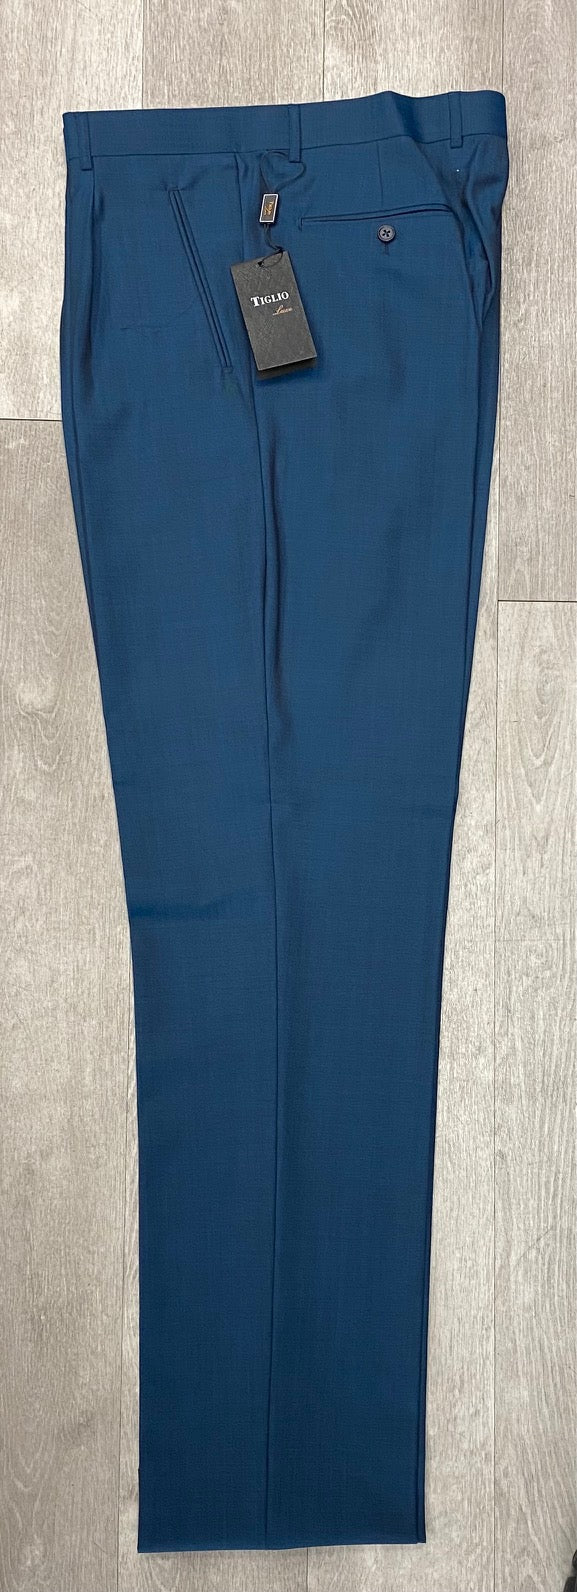 Tiglio Luxe 2521 Comfort Fit Single Pleated Pants 18+ Inch Leg TS5128/A Teal Blue (SIZE 42, 46 & 48 ONLY)